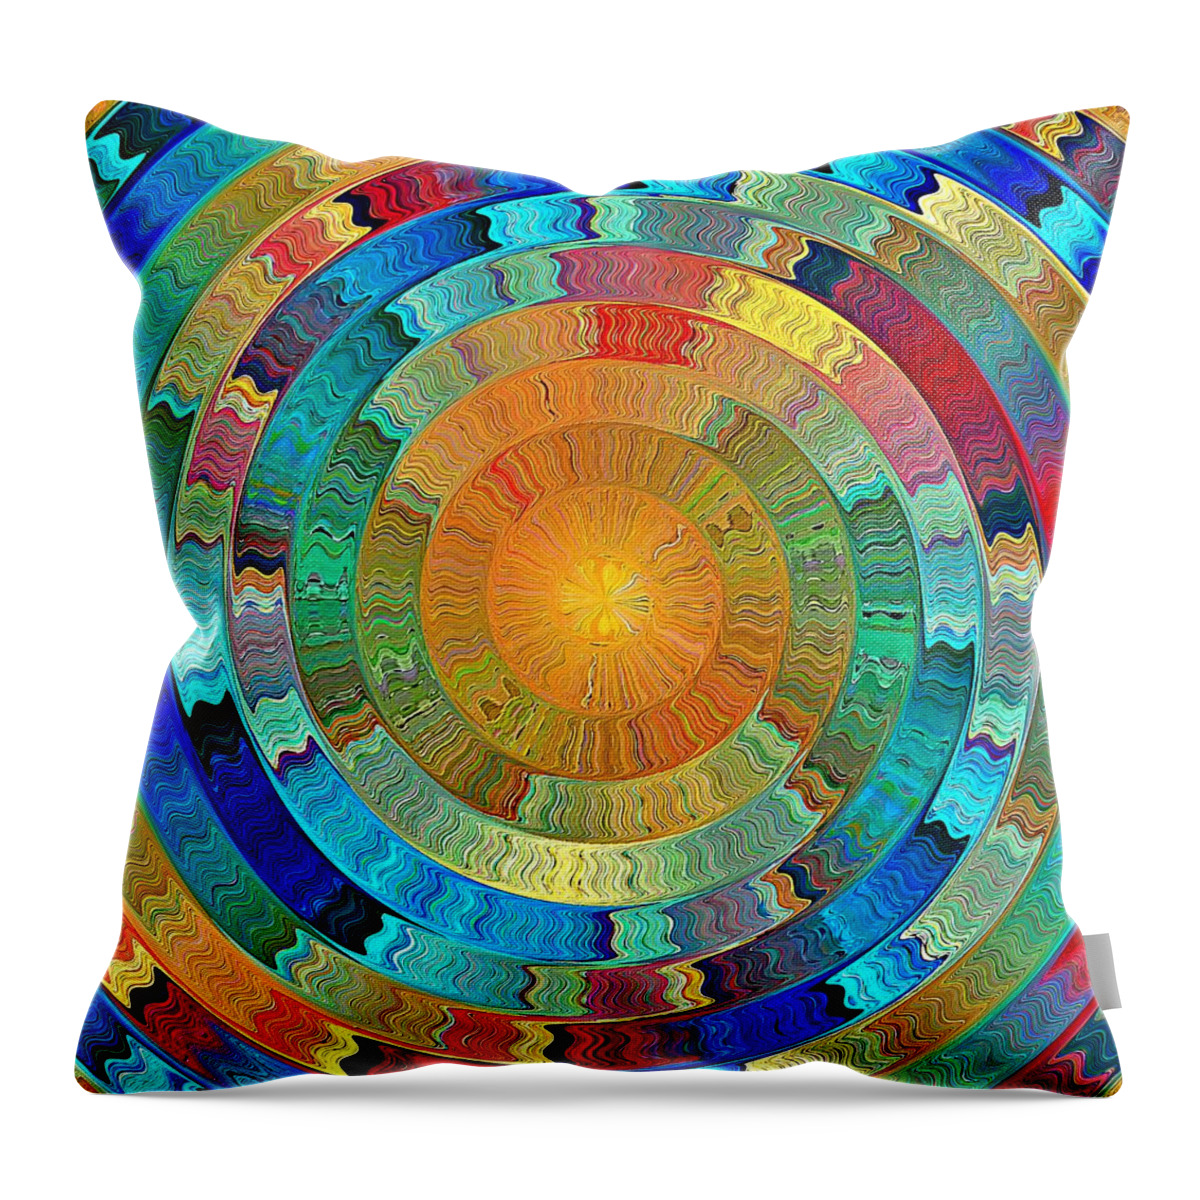 Primary Colors Throw Pillow featuring the digital art Native Sun by David Manlove